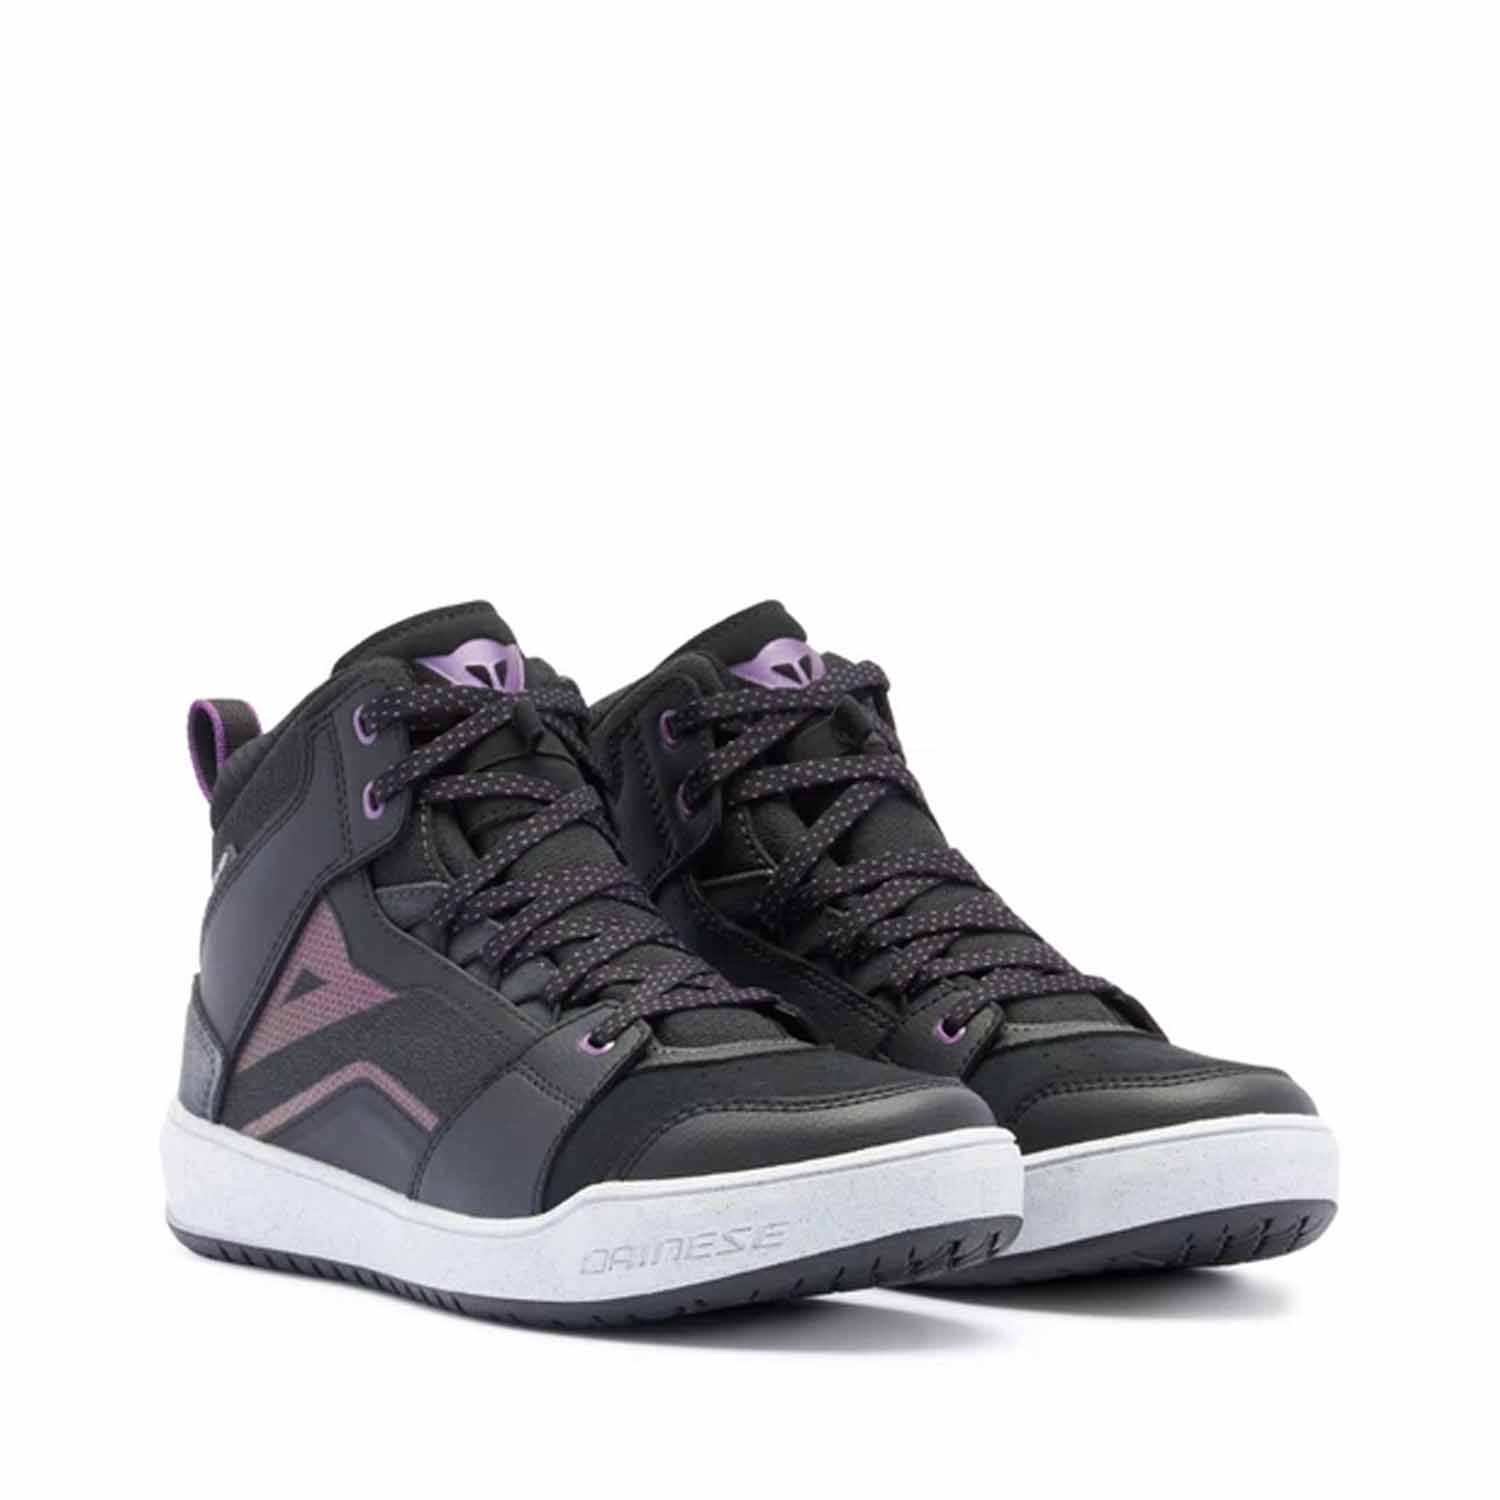 Image of Dainese Suburb D-WP Shoes WMN Black White Metal Purple Taille 38